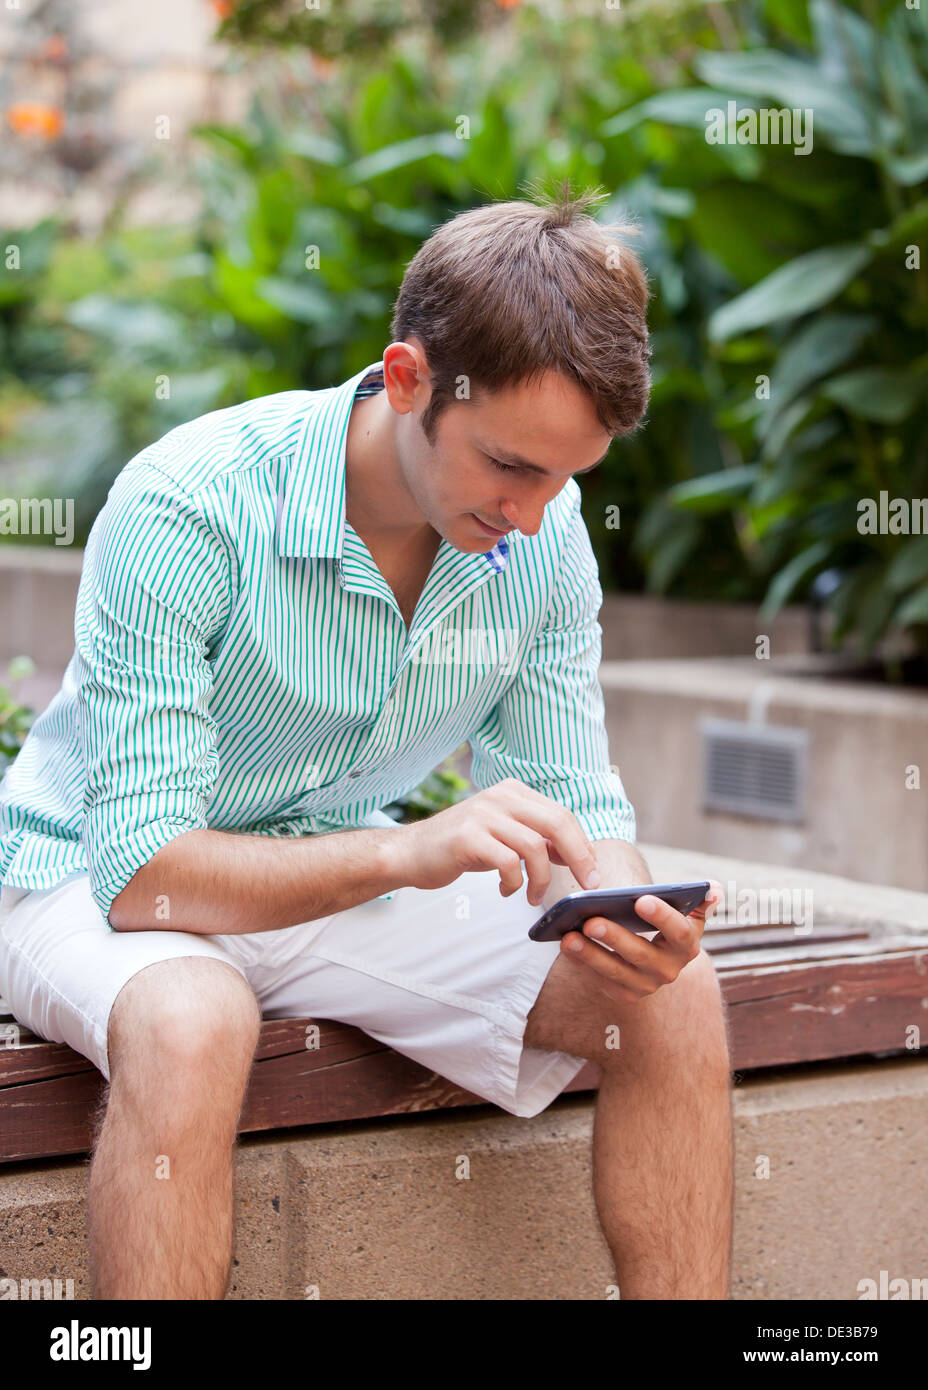 Man sitting in garden using a smart phone Stock Photo